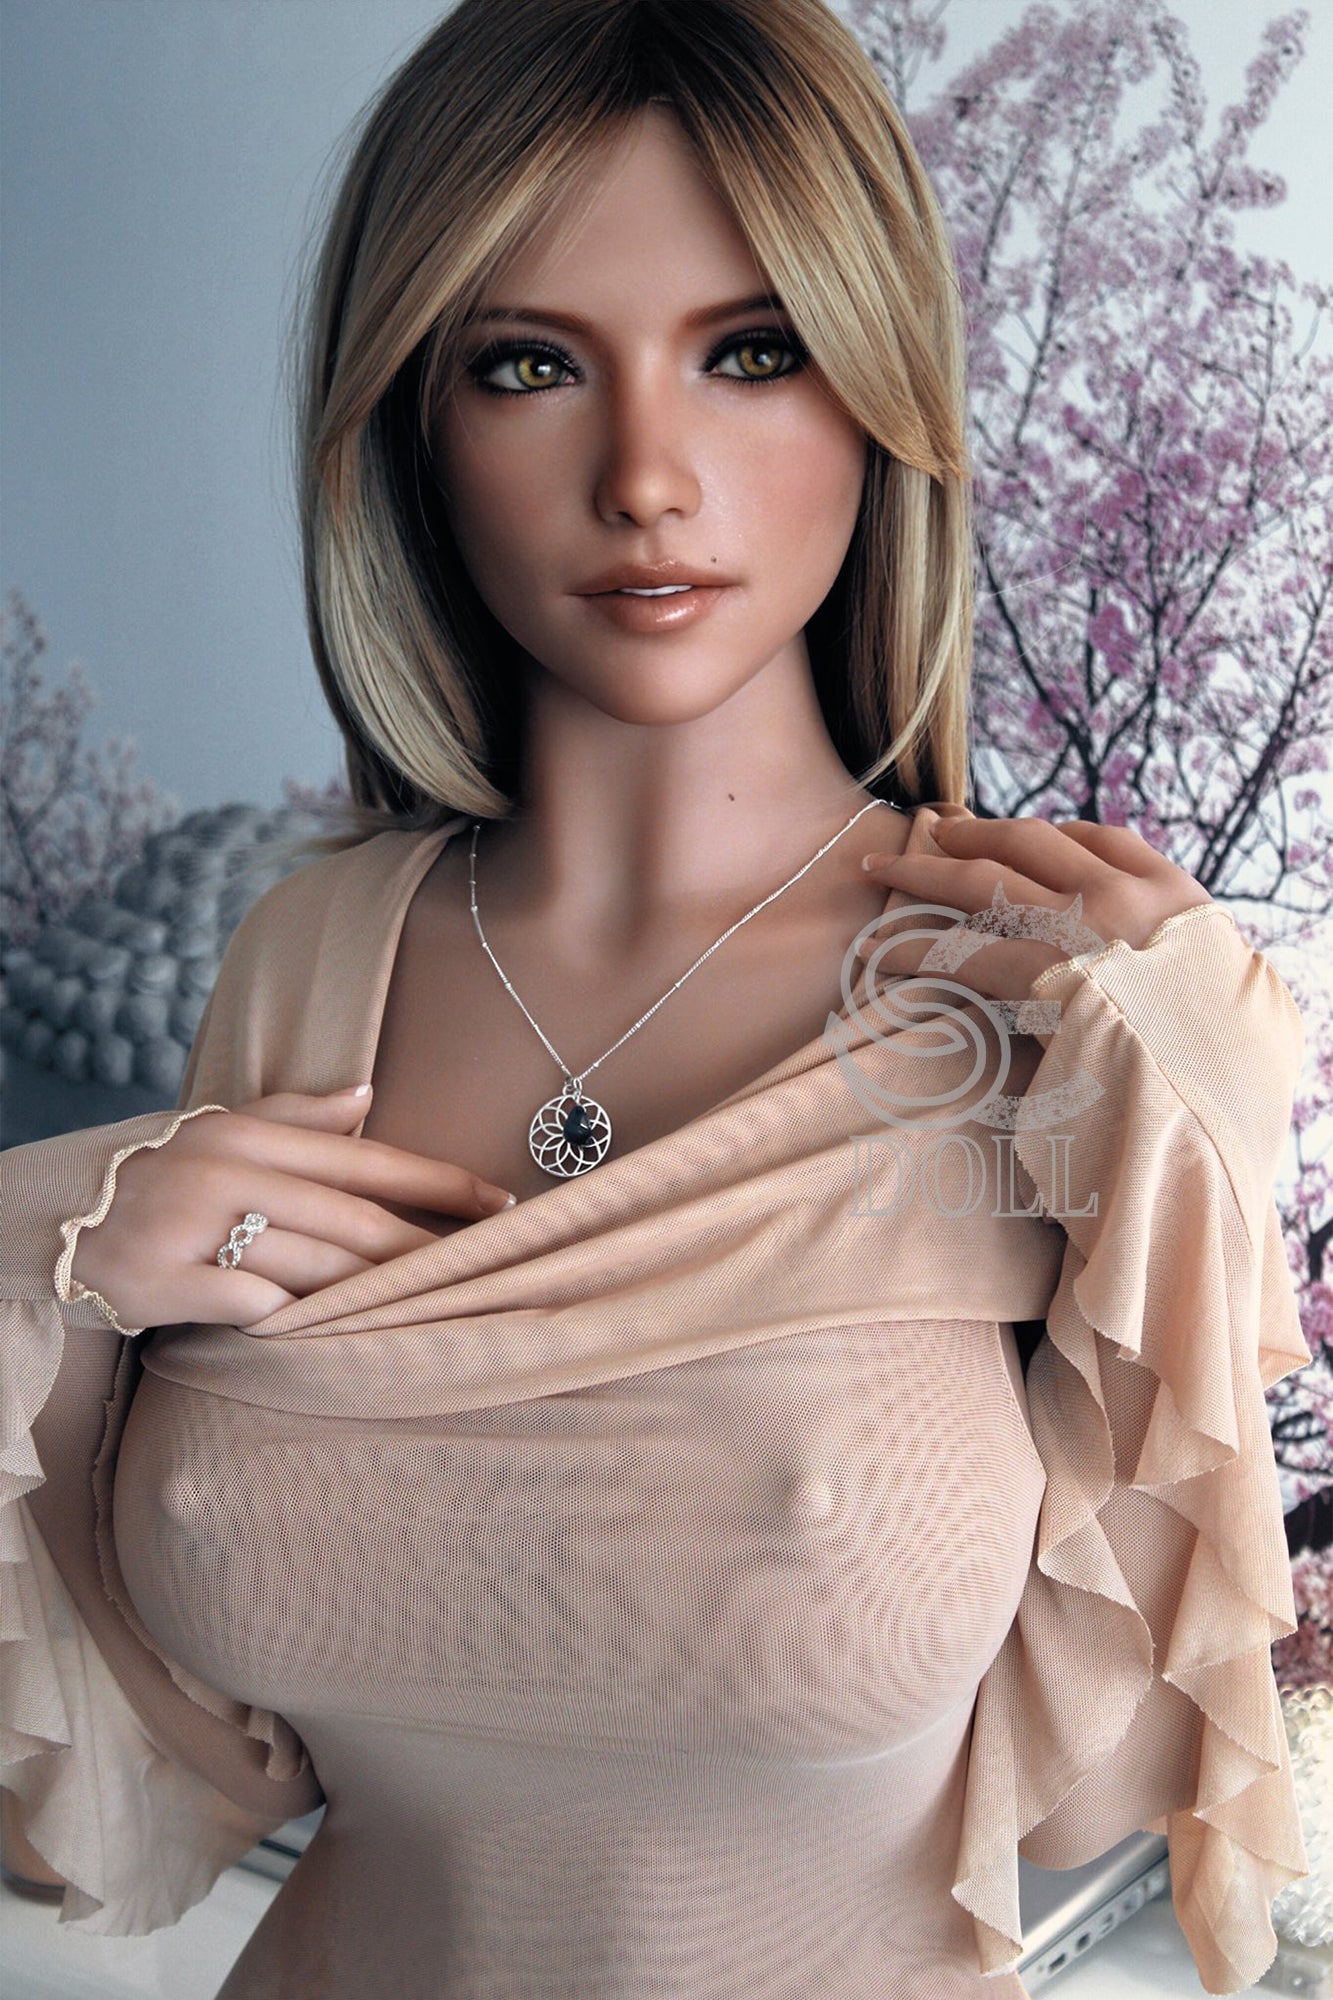 SEDOLL 157 cm H TPE - Queena | Buy Sex Dolls at DOLLS ACTUALLY